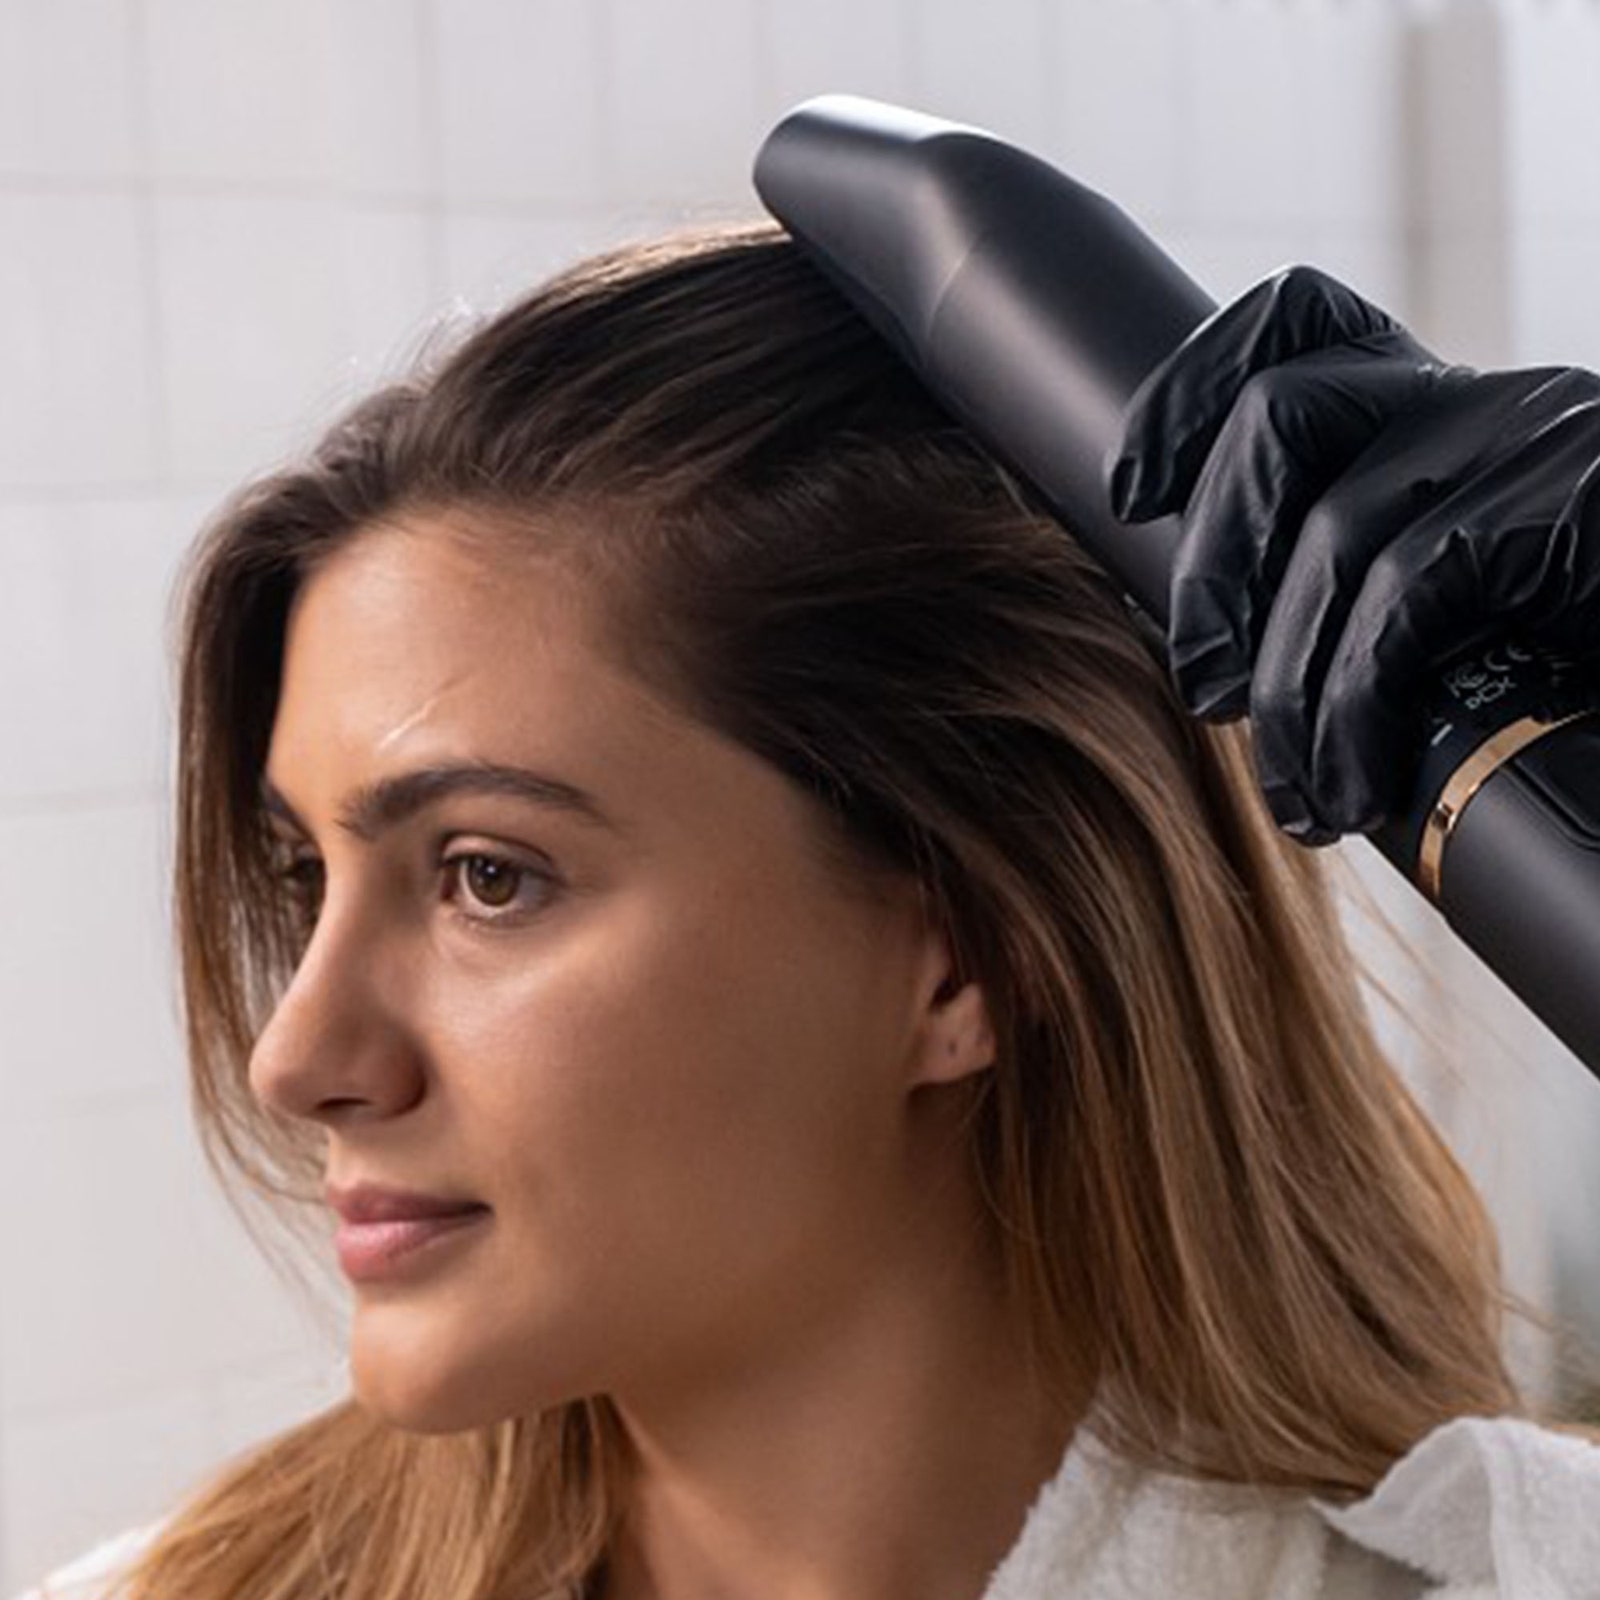 AI bots and 3D-printed brows: L’Oréal ups its tech investment